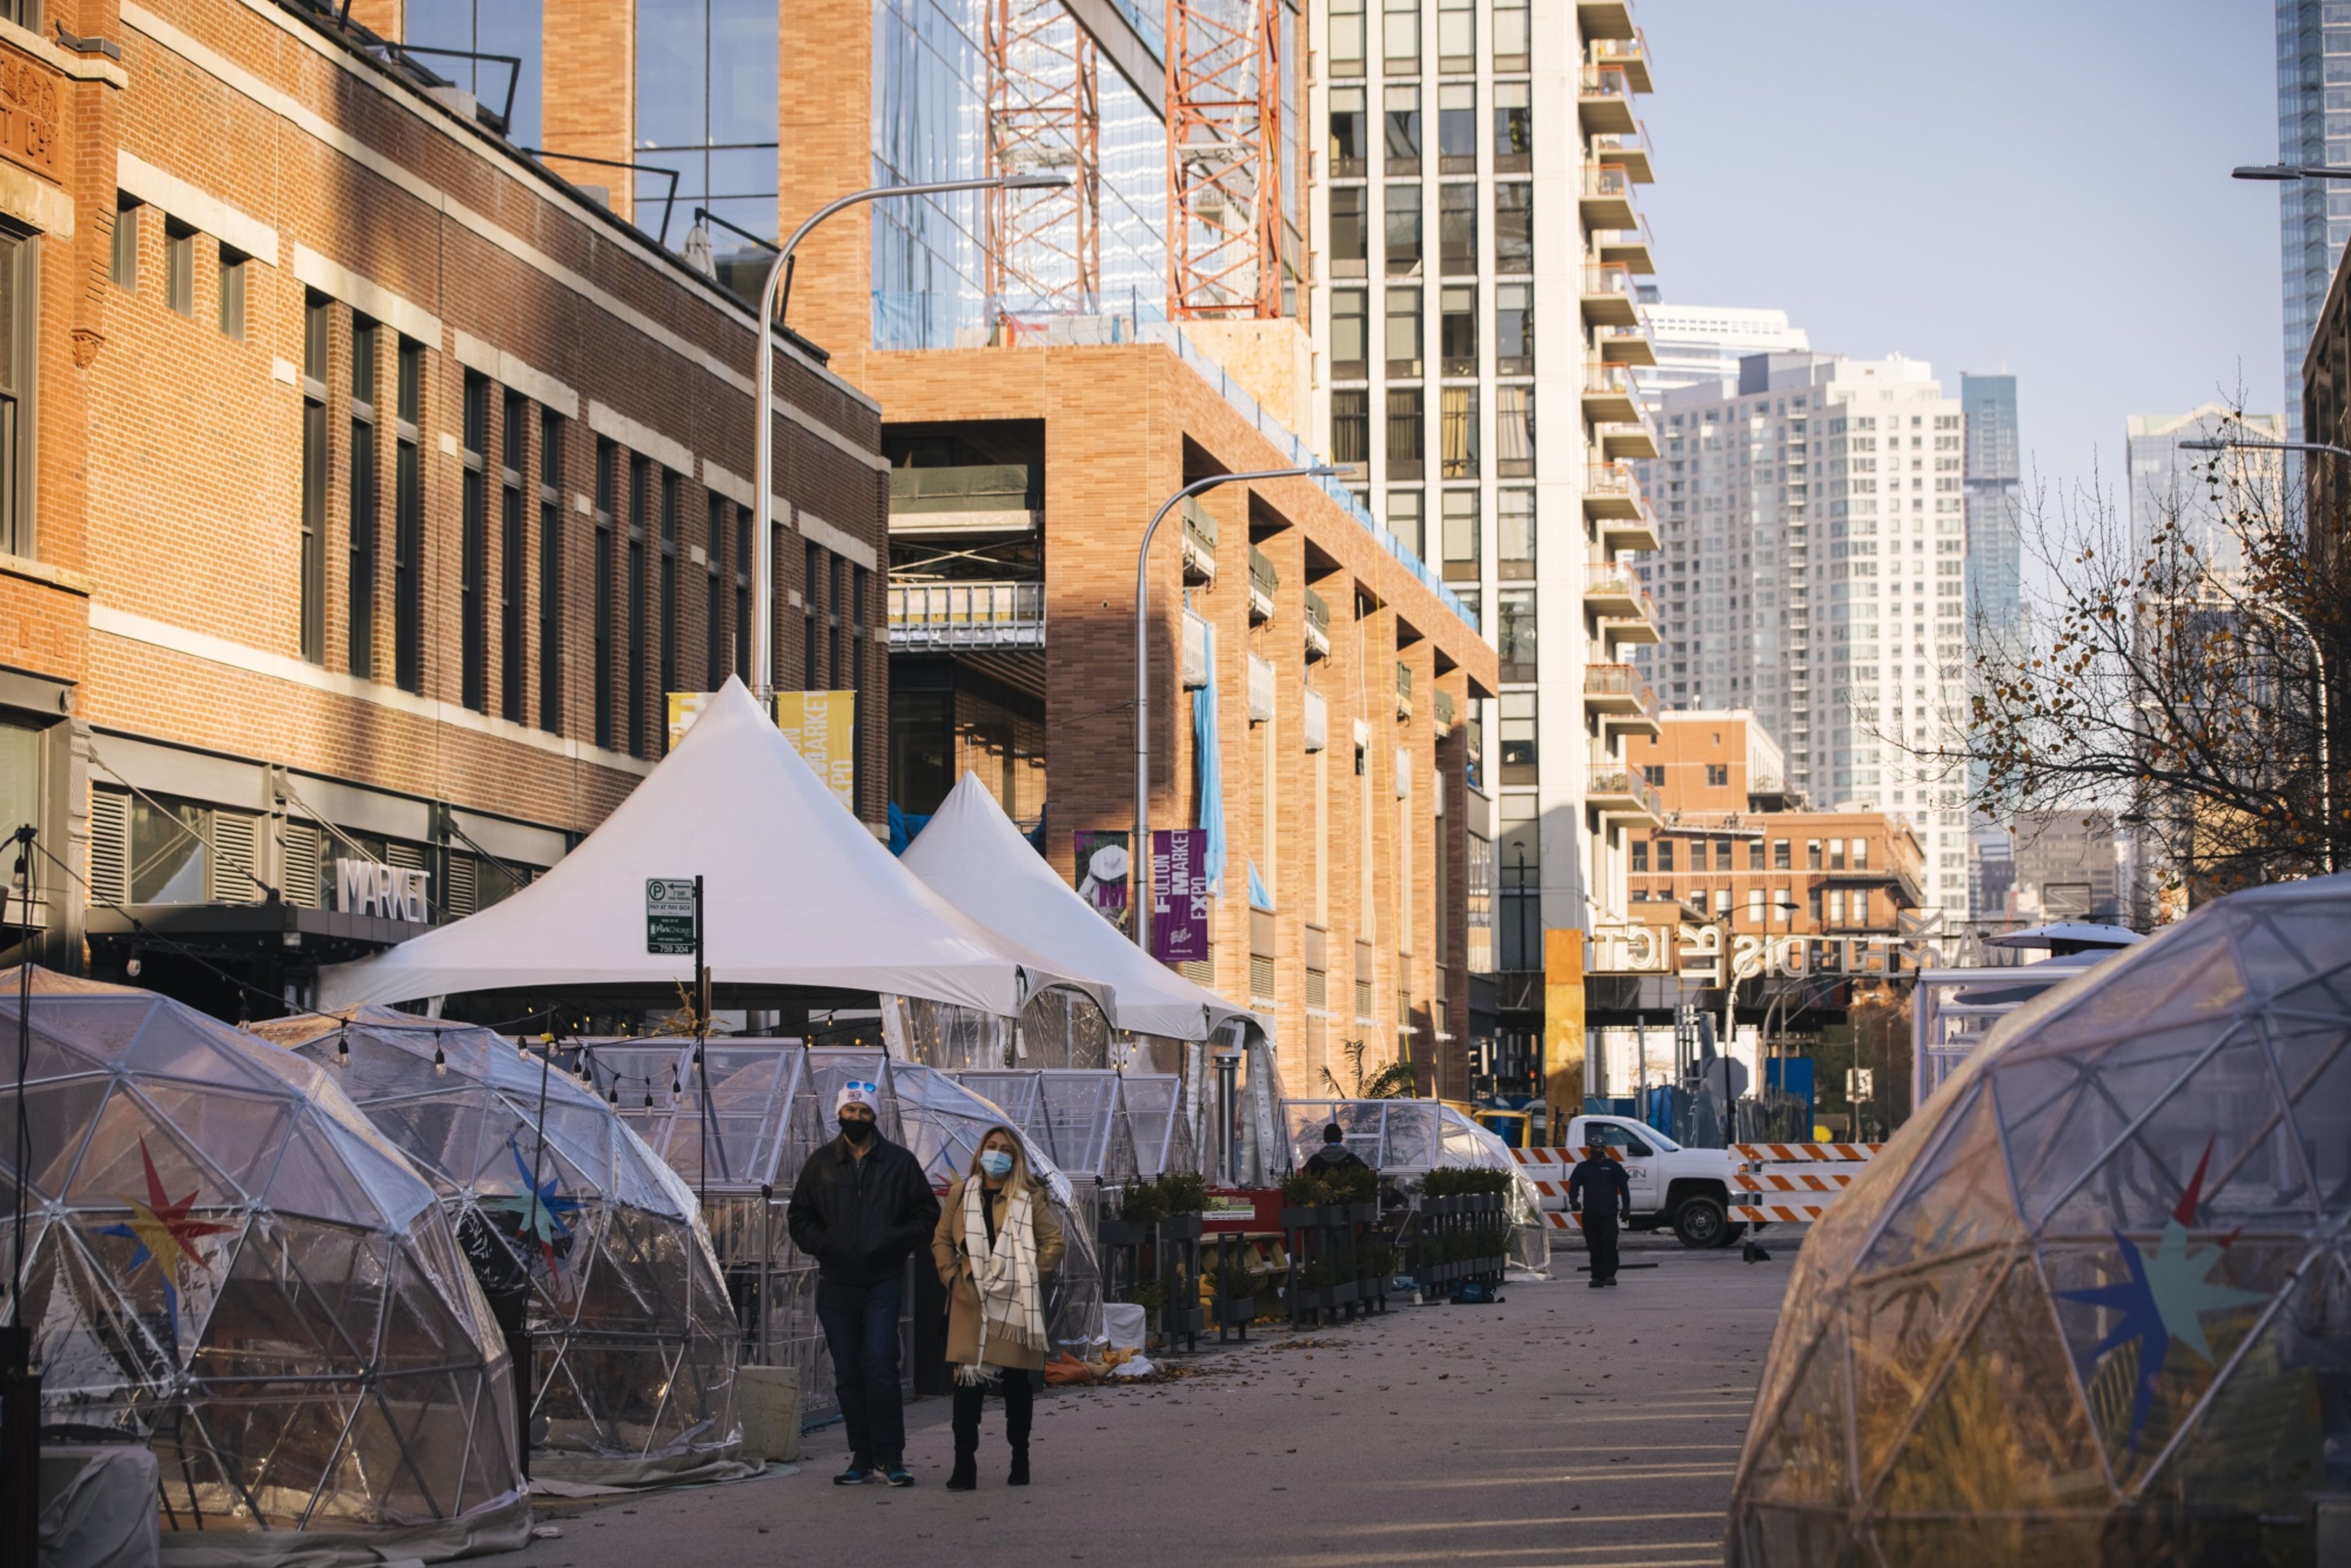 Pedestrians walk past social distancing bubble dining tents at West Fulton Market in Chicago on Nov. 13.&nbsp;